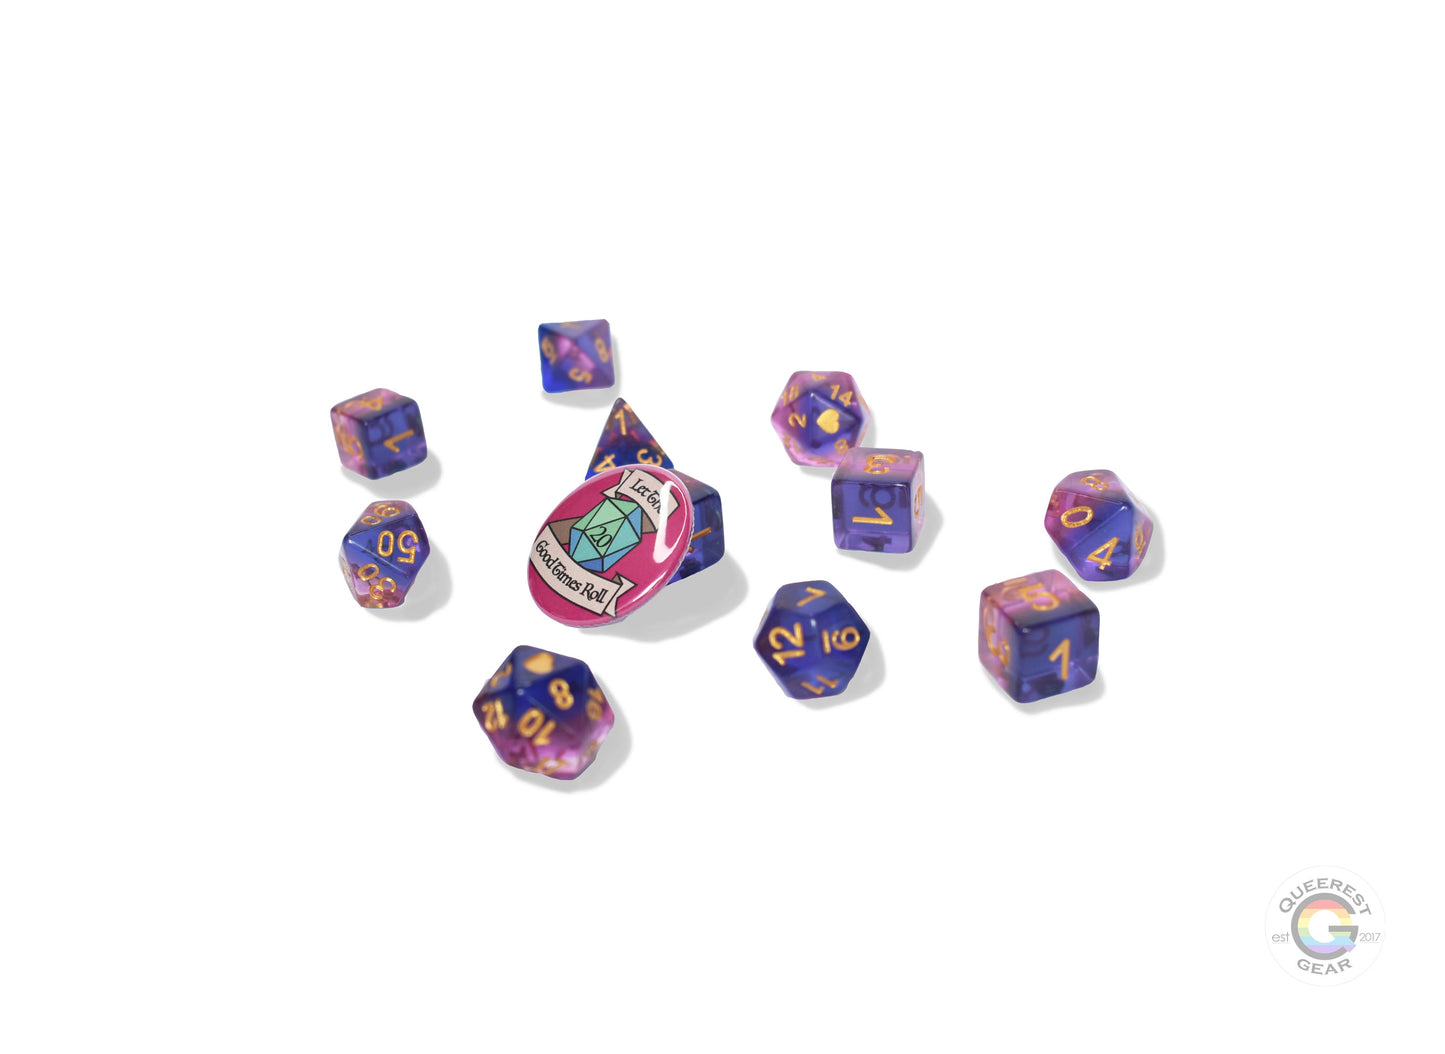 11 piece set of polyhedral dice scattered on a white background. They are transparent and colored in the stripes of the genderfluid flag with gold ink. There is the freebie “let the good times roll” pinback button among them.